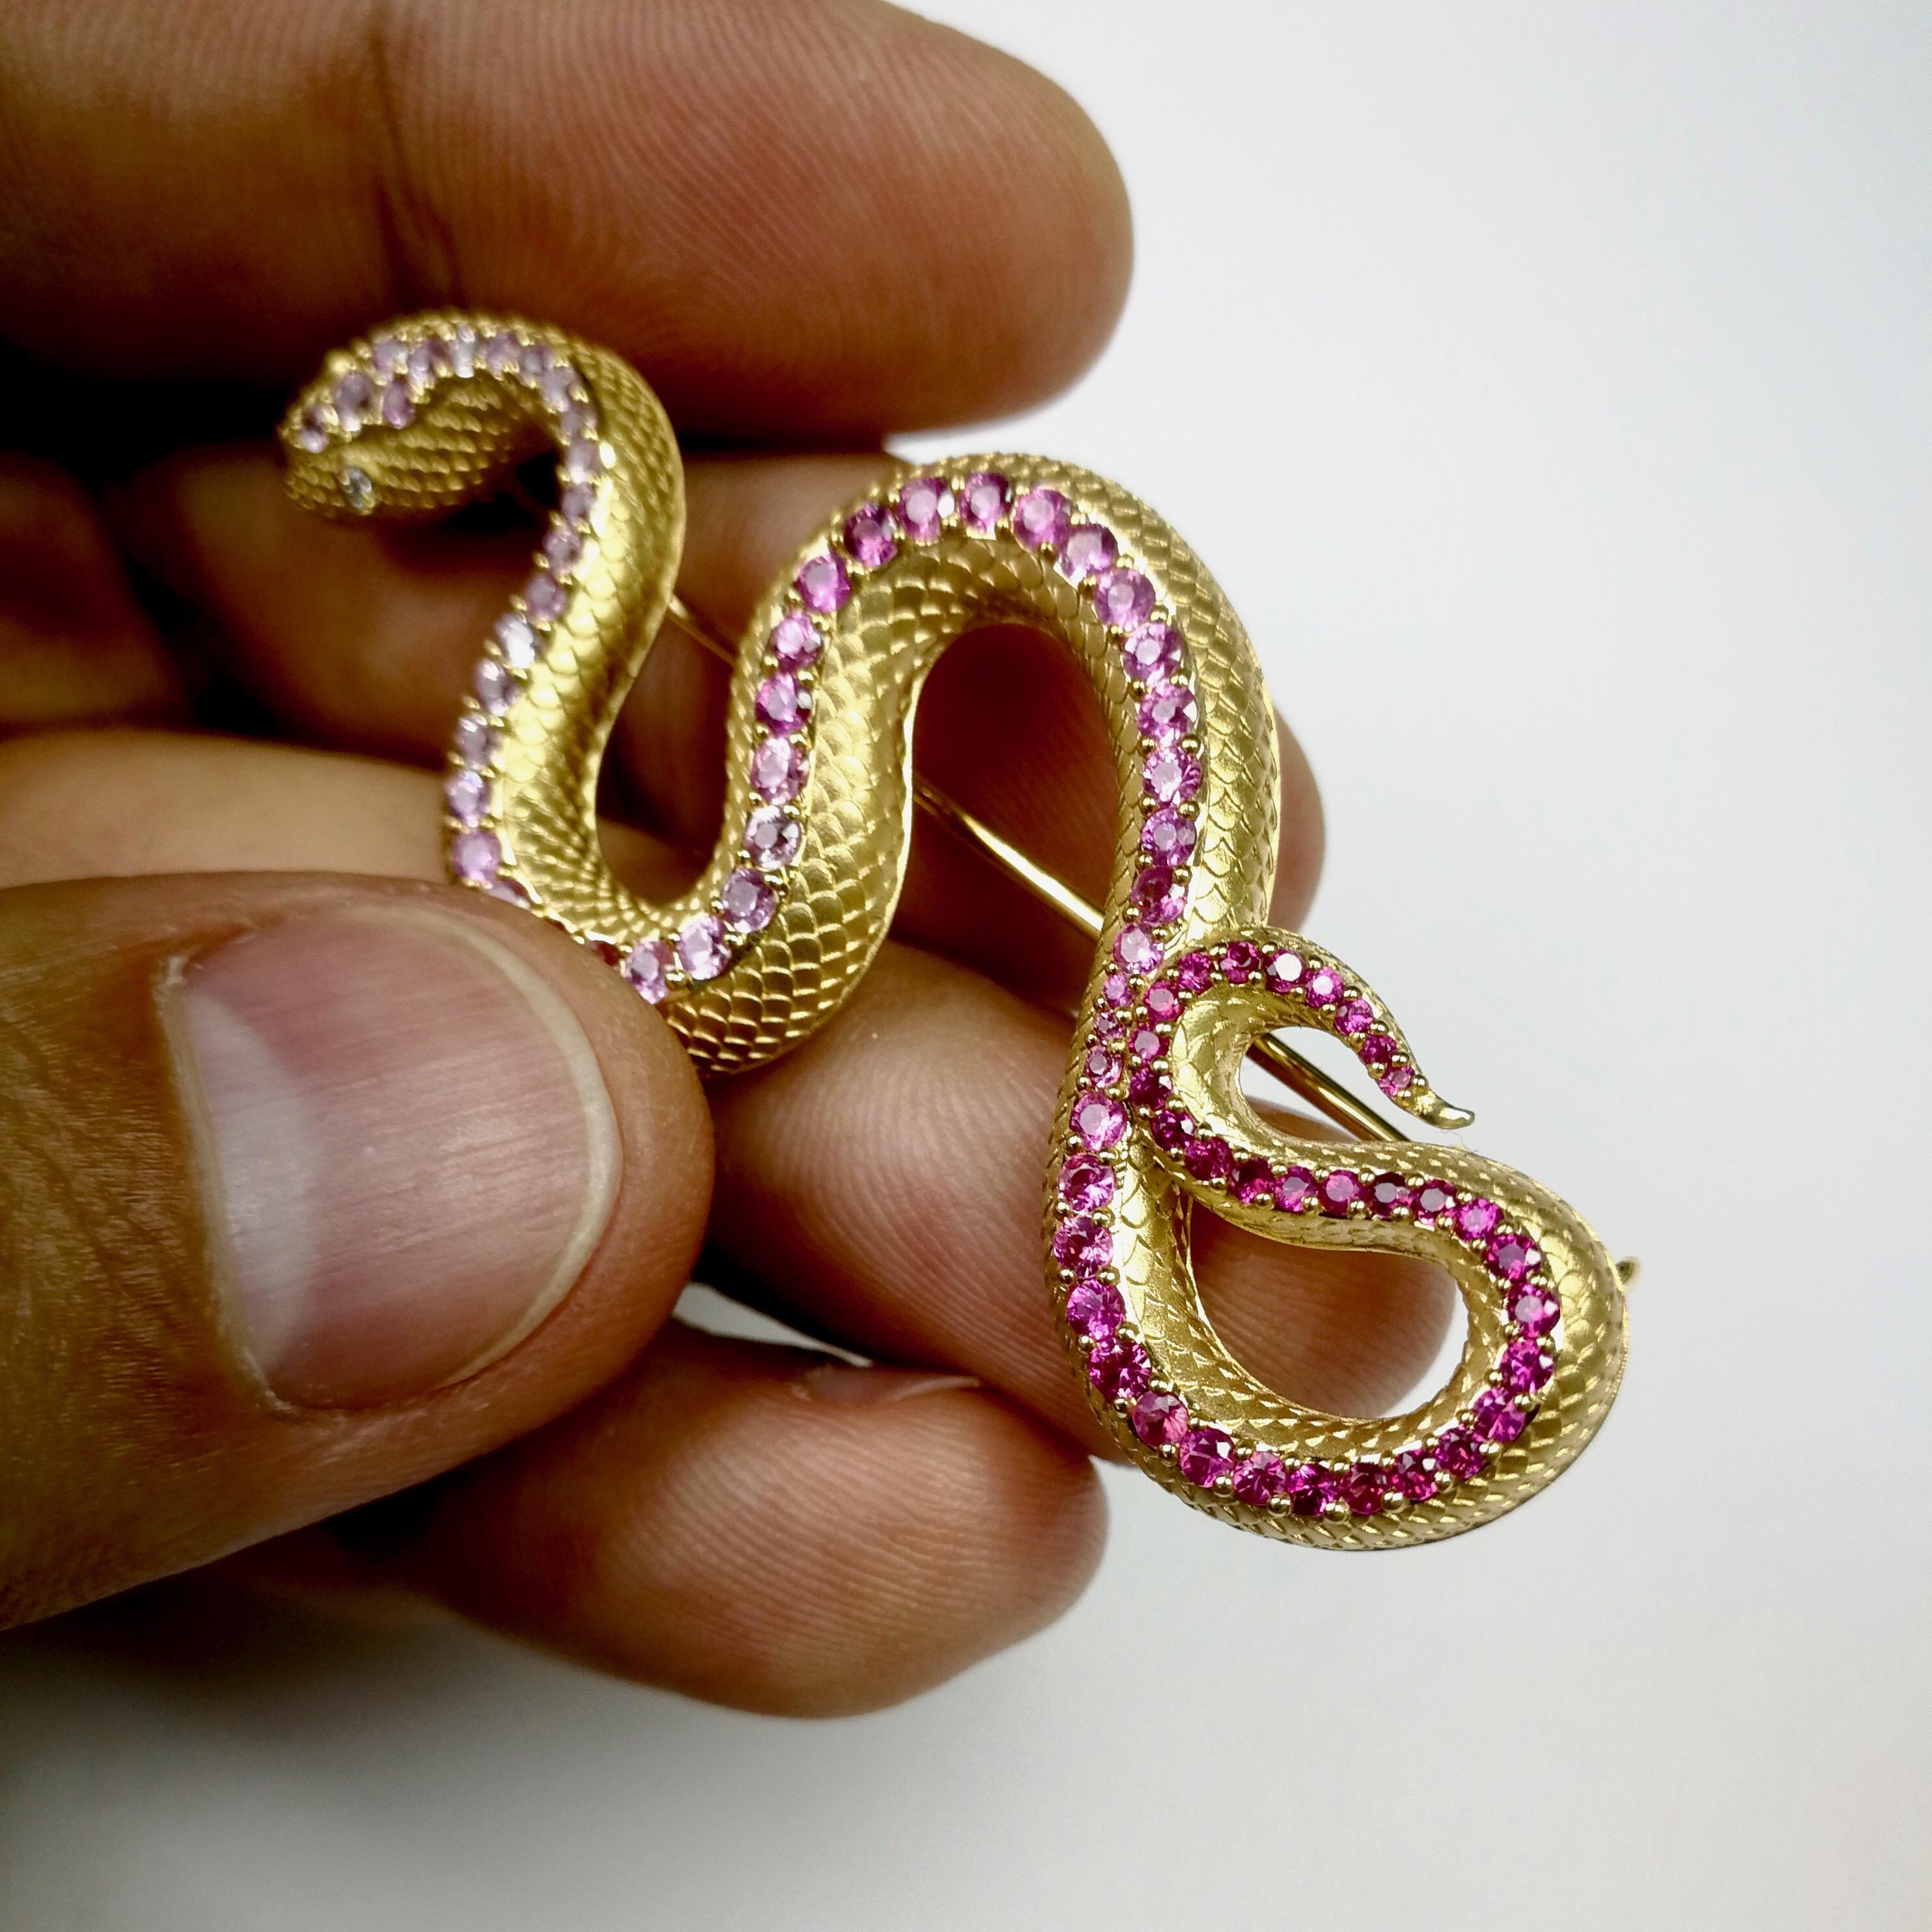 Pink Sapphire Diamonds 18 Karat Yellow Gold Snake Ring Earrings Brooch Suite

Just take a look at this hi-detailed Suite, distributes all the wisdom of the Snake. Carefully selected color graduation from Pink Sapphires to Diamonds gives the